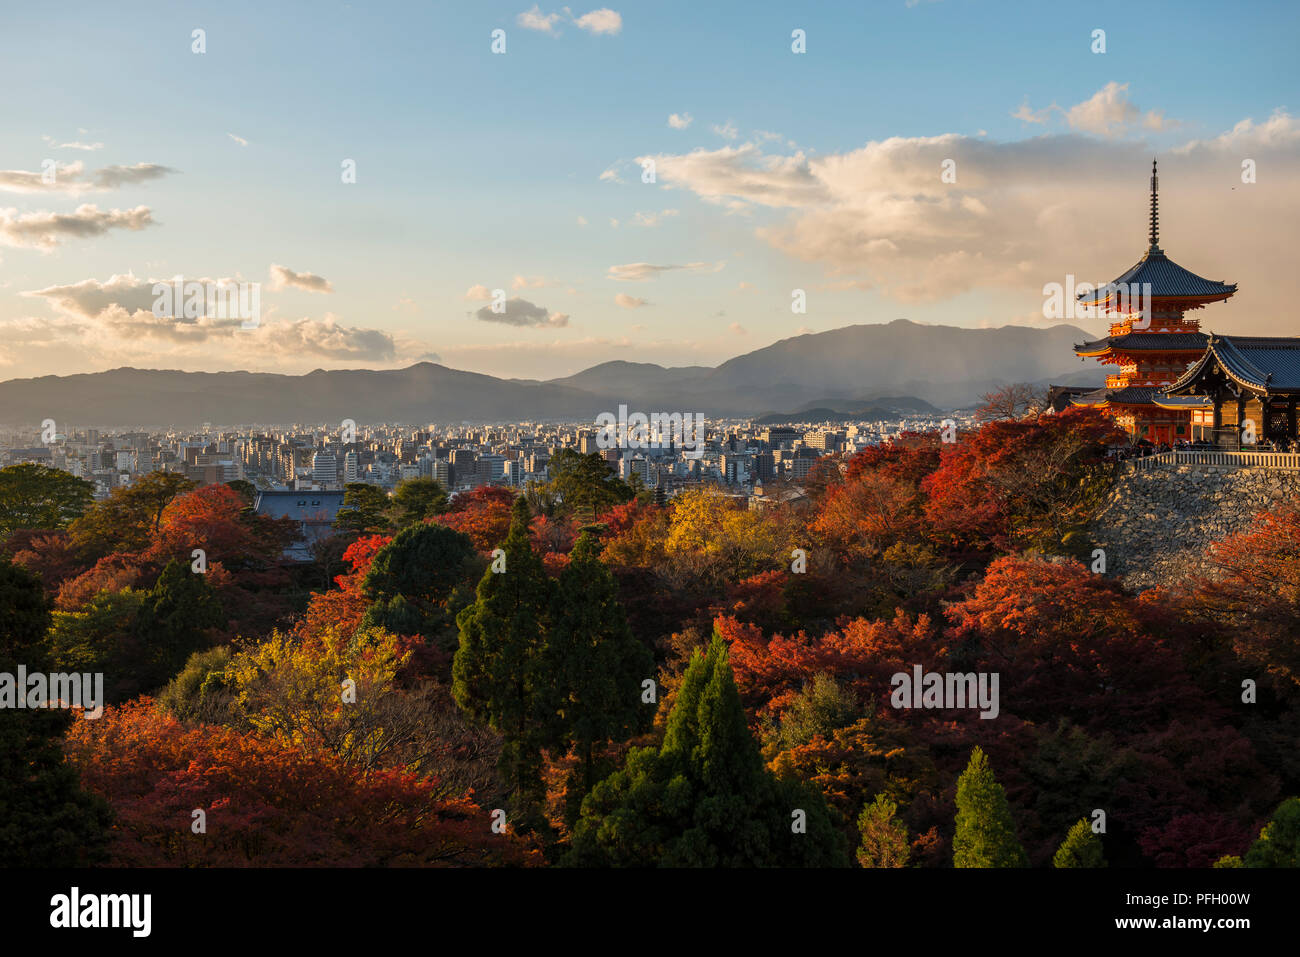 Late afternoon view of the Kyoto city skyline from Kyomizu-Dera Temple in Kyoto, with the temple and autumn trees in the foreground. Kyoto, Japan Stock Photo